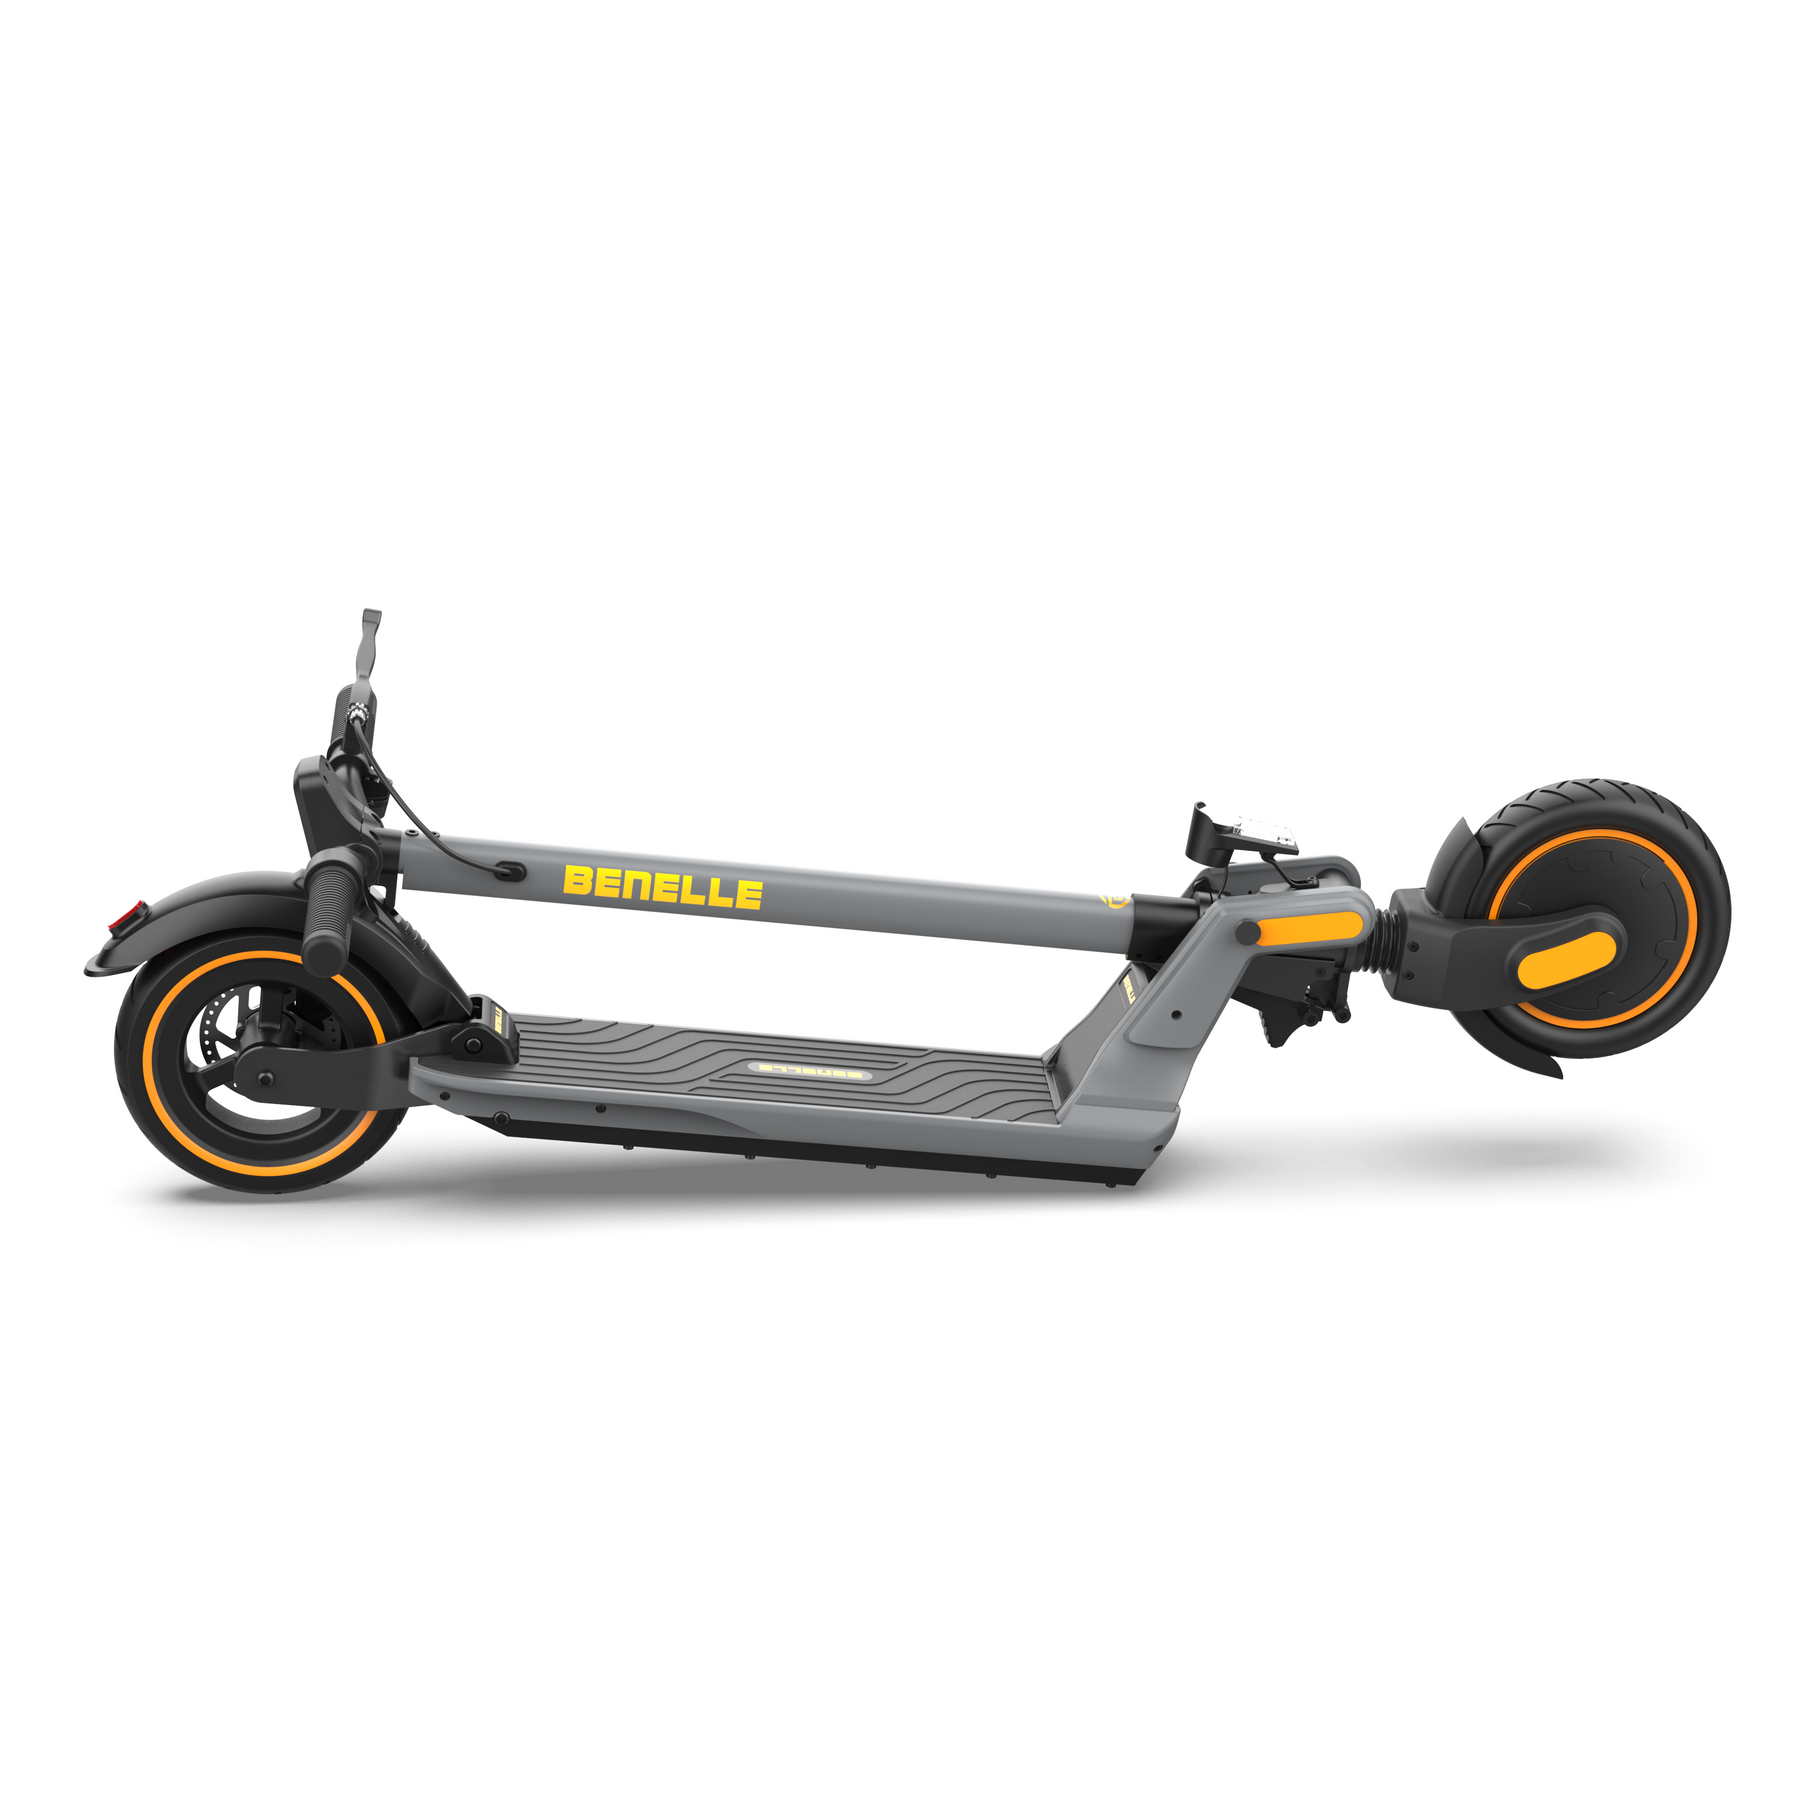 Benelle S500L Electric Scooter